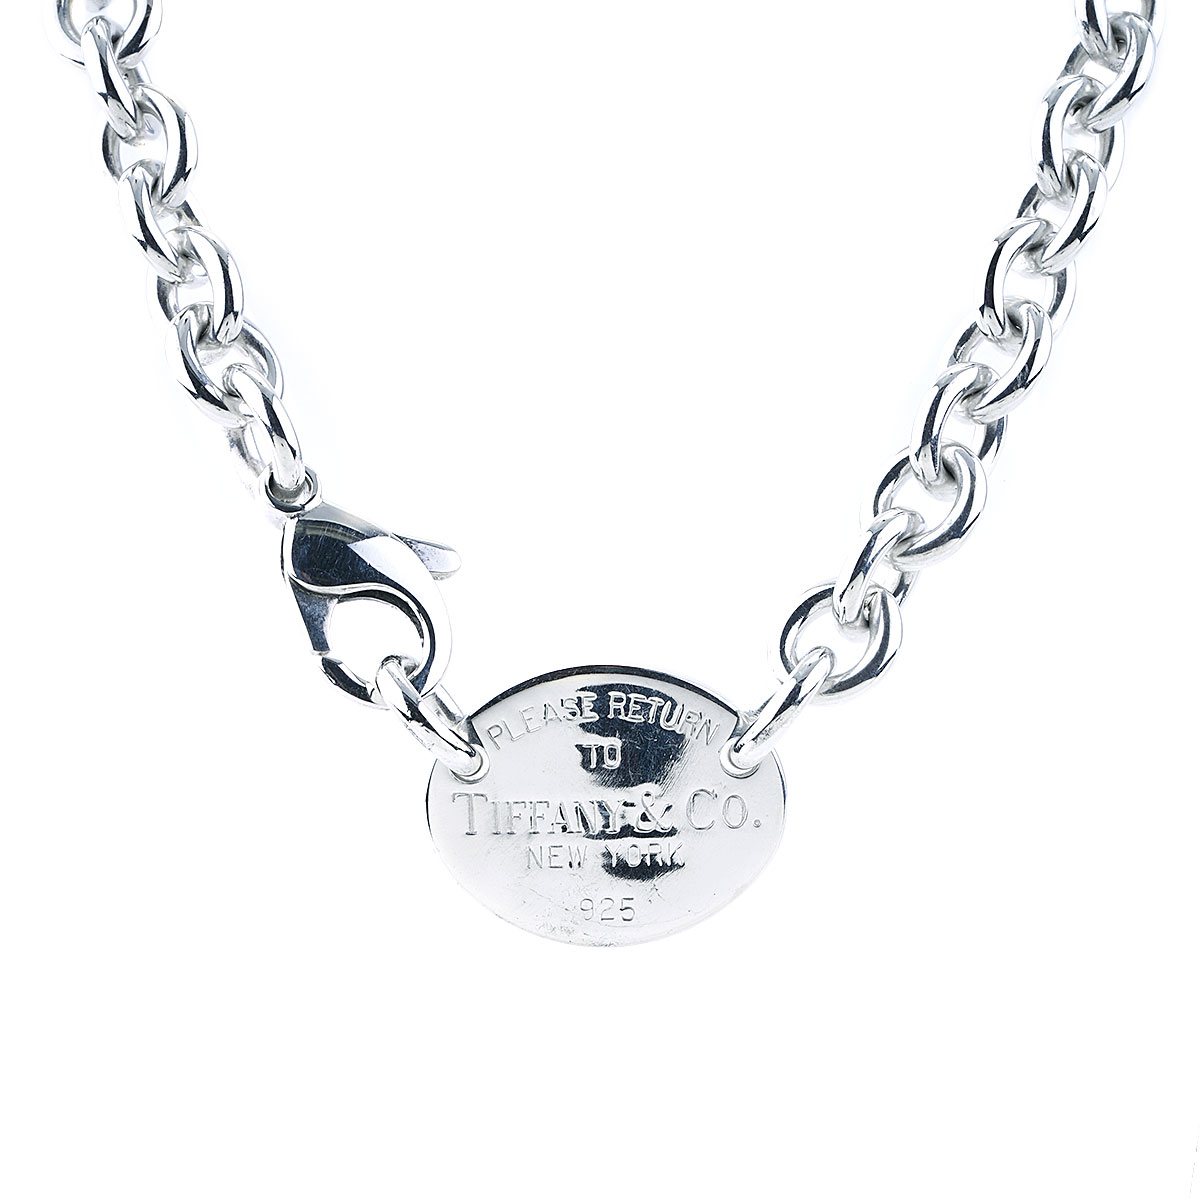 Tiffany & Co. Return to Tiffany Oval Tag Necklace 925 Sterling Silver  Retail$898 | eBay